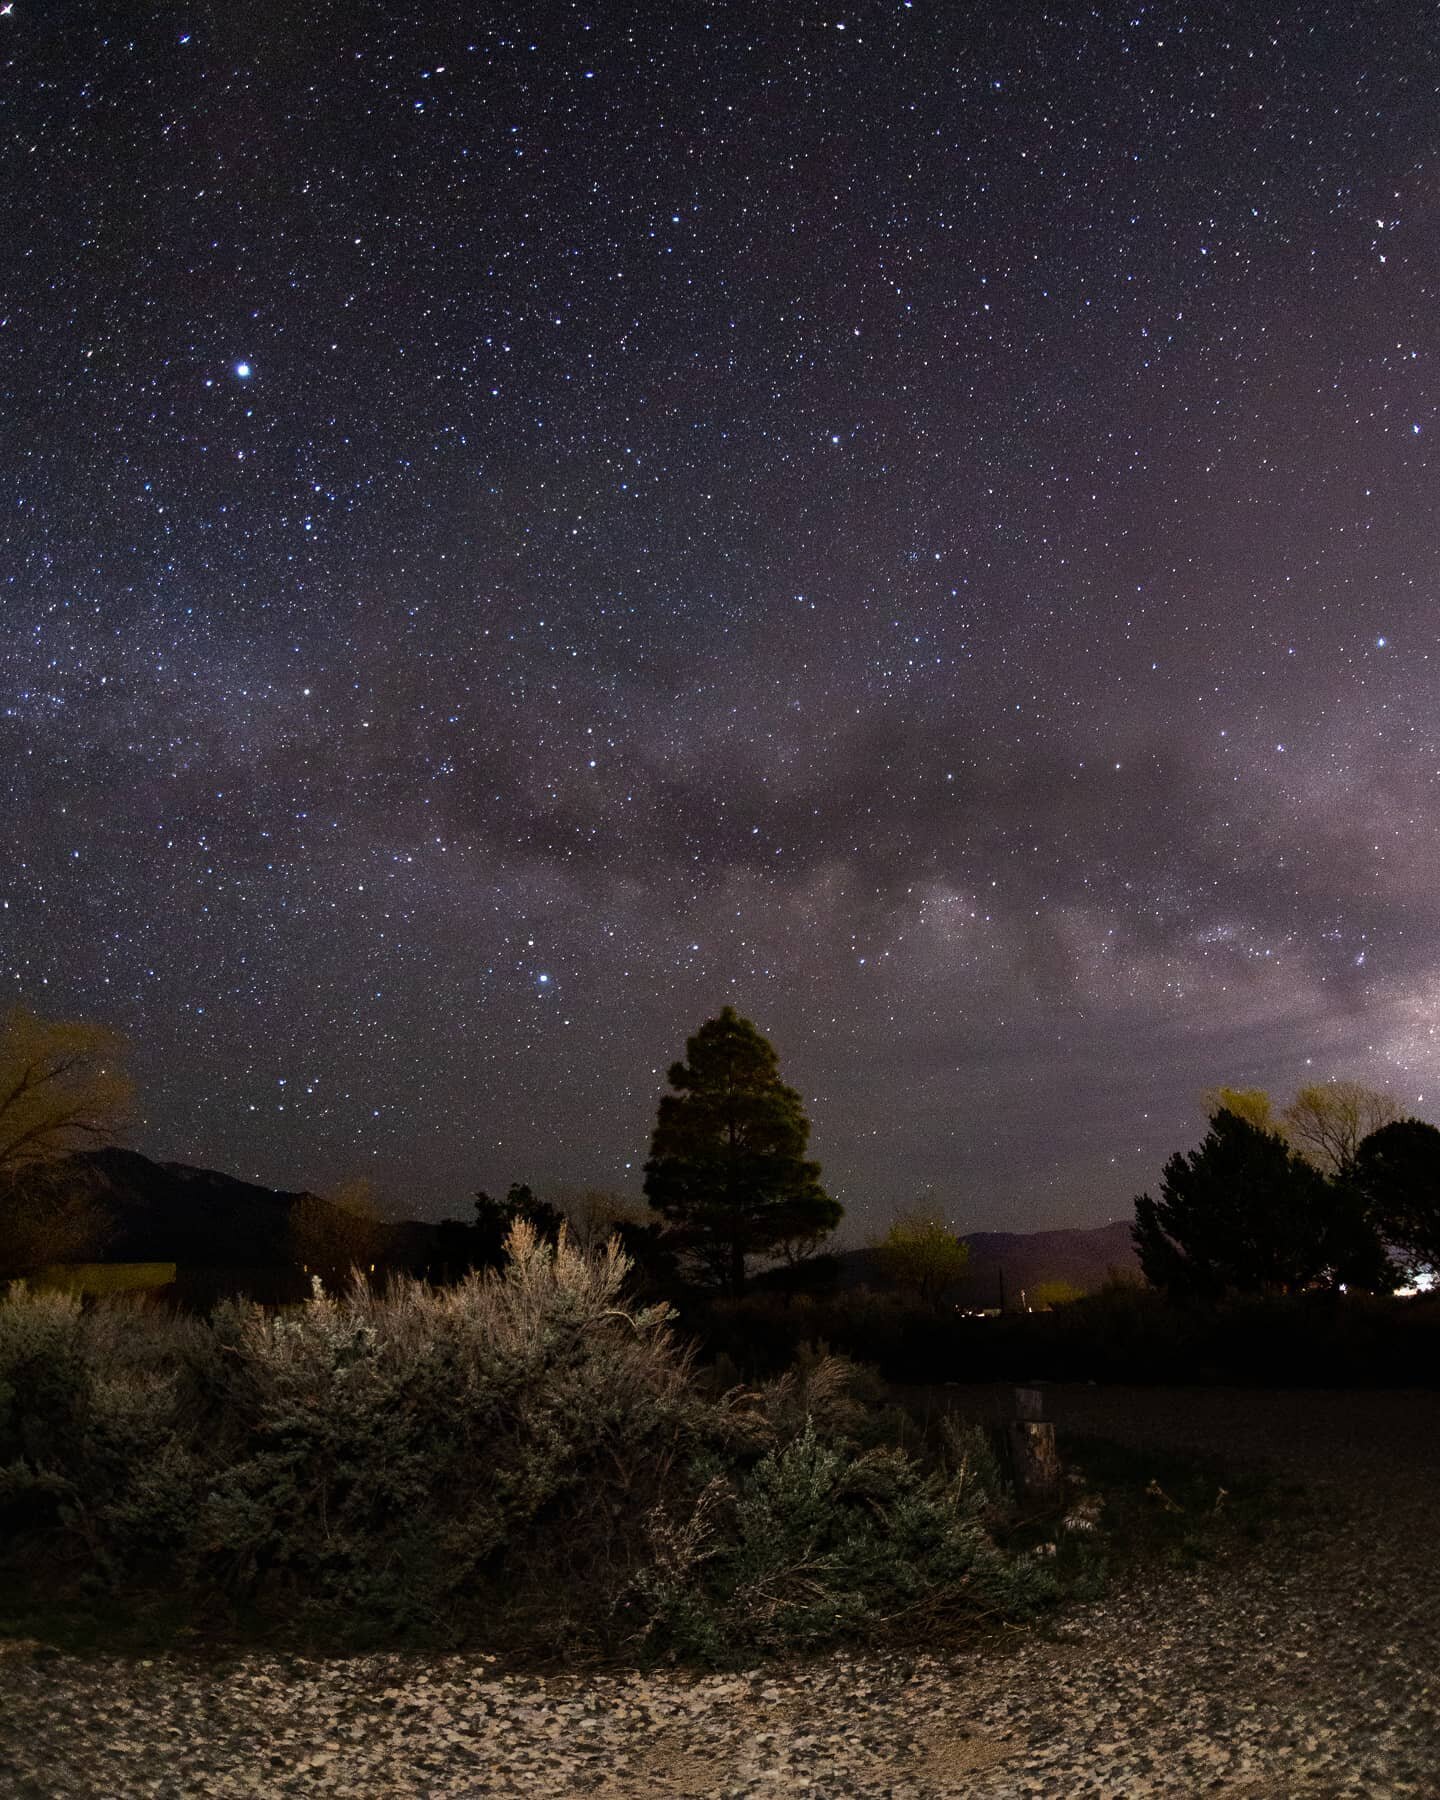 In Taos, there's so little light pollution, you can see the outline of the Milky Way galactic center with just your eyes.